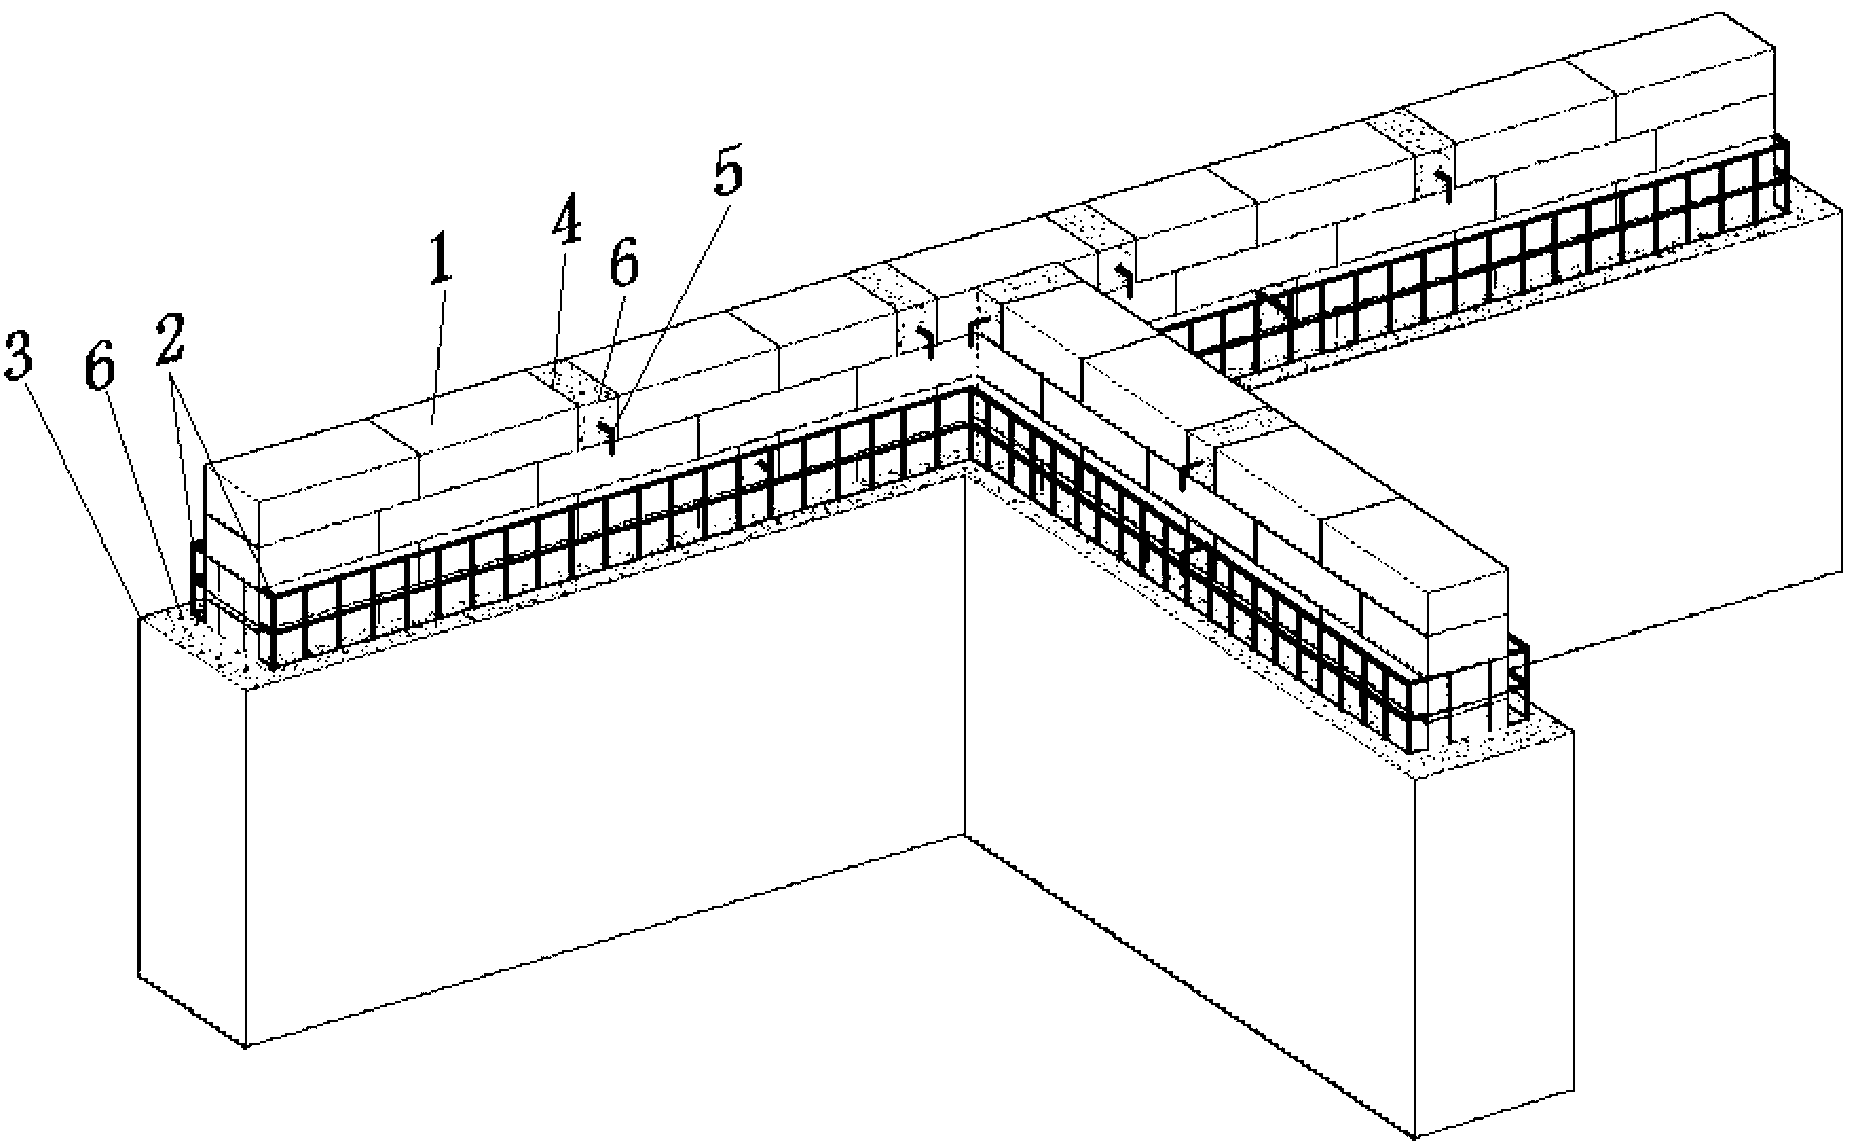 Combined wall with connecting keys and waste brick masonries filled in regenerated concrete wall boards and fabrication method of combined wall